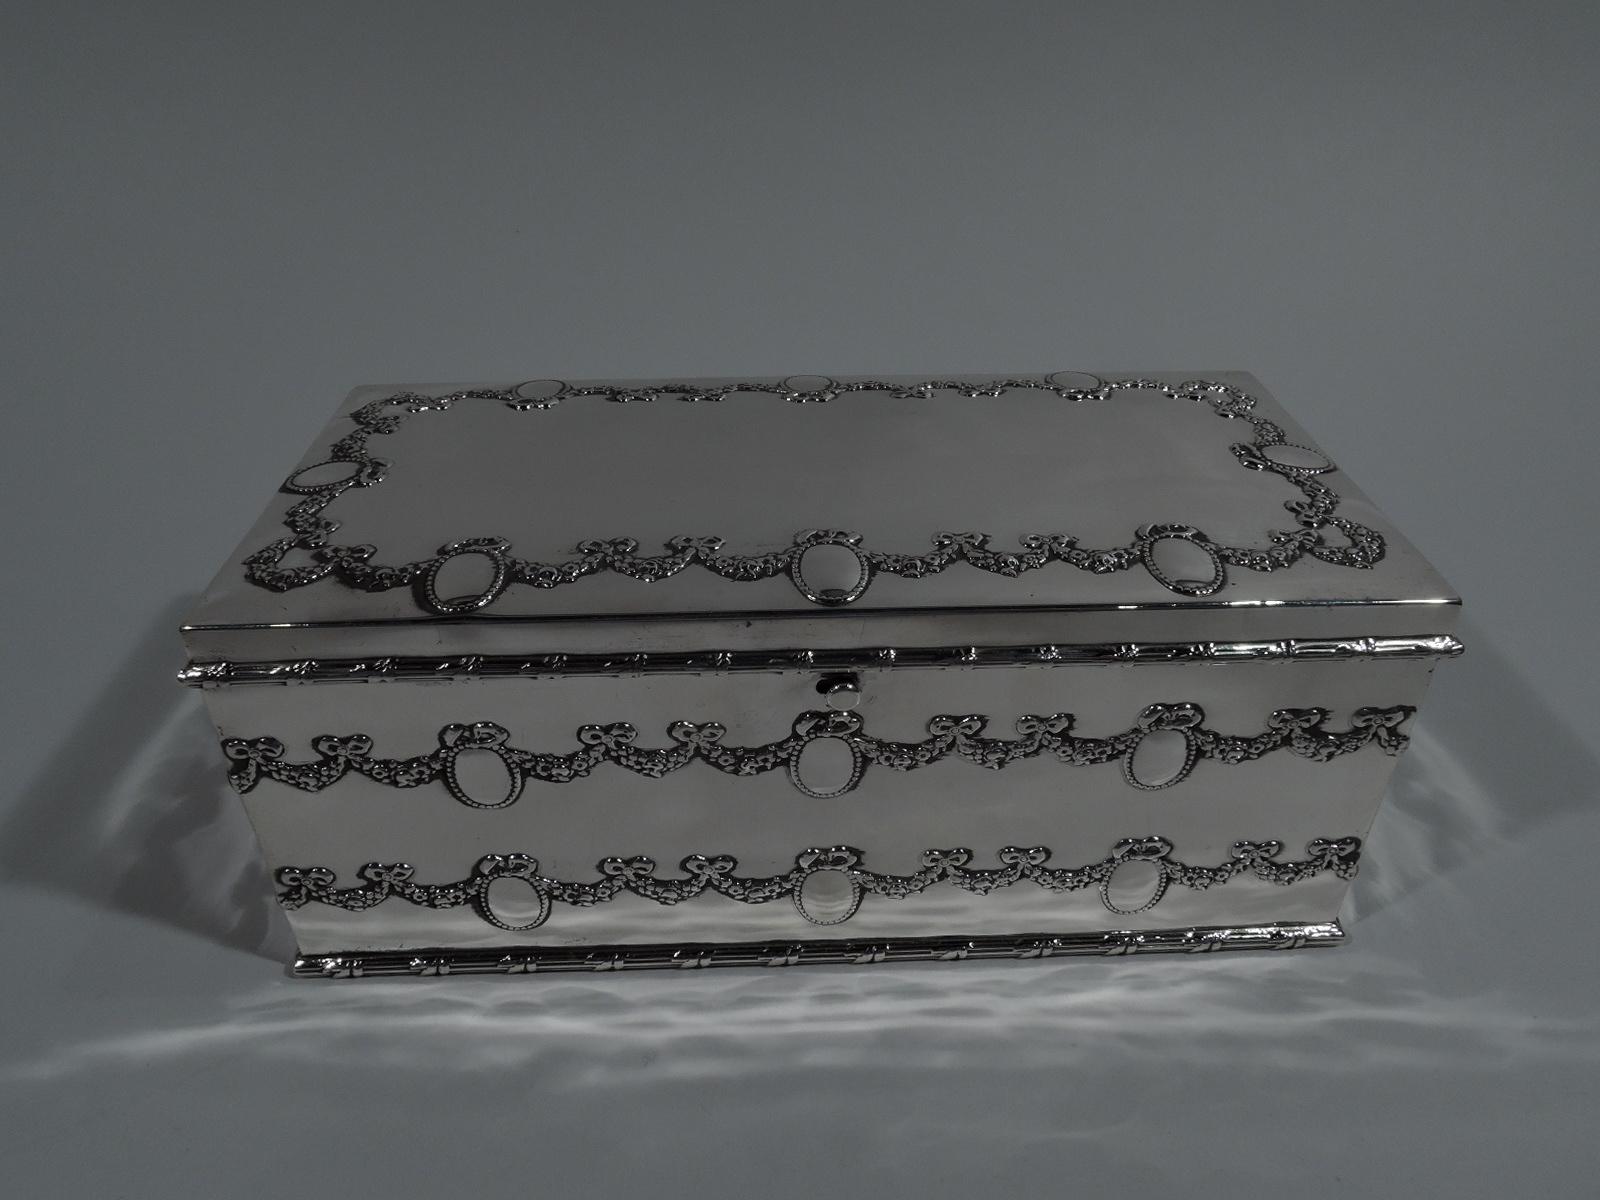 Edwardian Regency sterling silver jewelry box. Made by Durgin (part of Gorham) in Concord, New Hampshire, circa 1910. Rectangular with straight sides and hinged cover. Box encircled with double floral garland and ribbon-tied and beaded oval frames